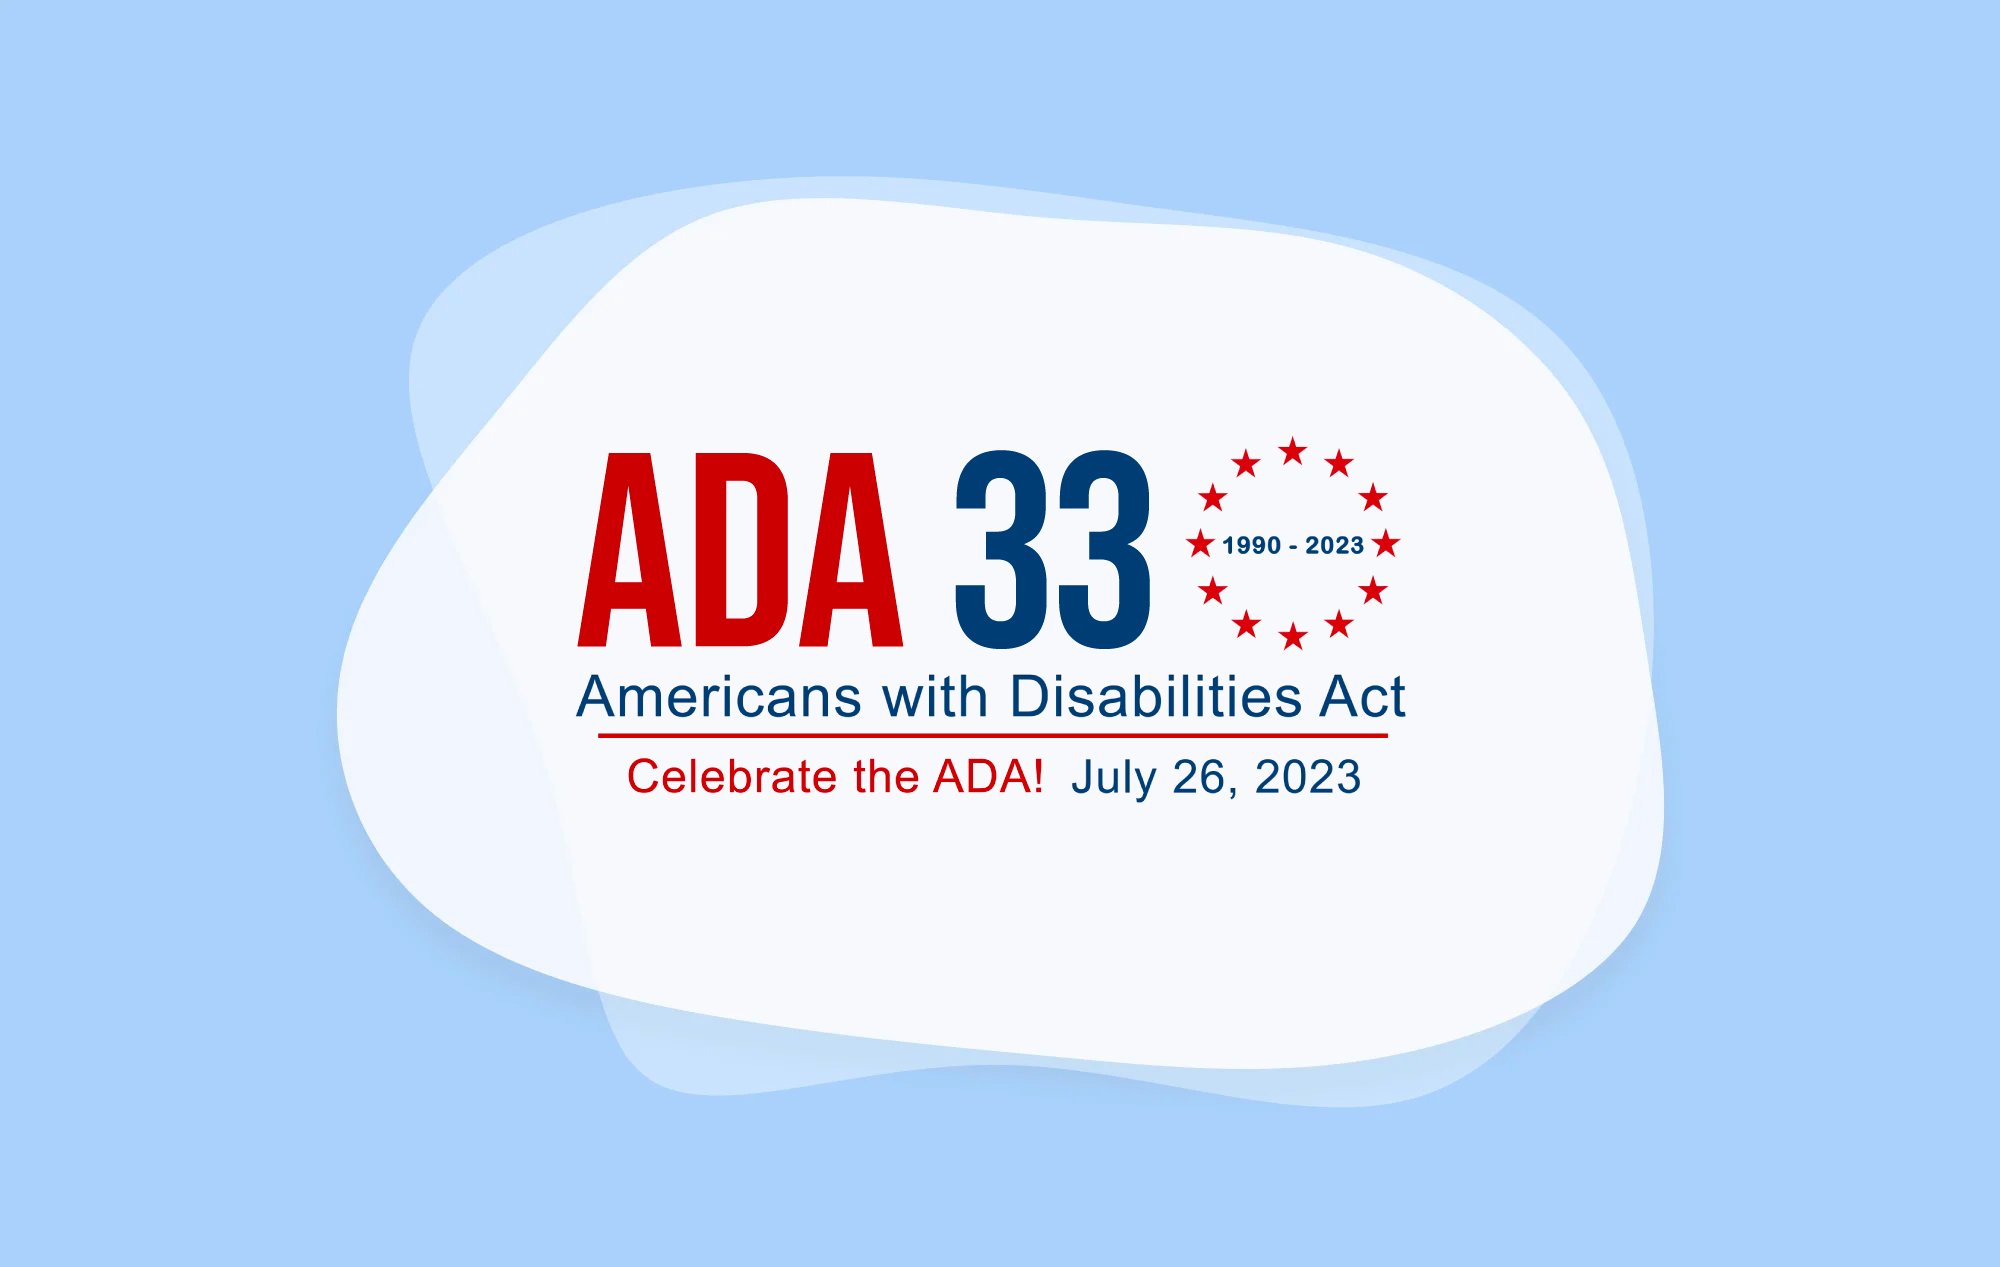 Red and blue logo that says ADA 33 with 1990-2023 surrounded by red stars in a circle. Text below says ‘Americans with Disabilities Act, Celebrate the ADA! July 26, 2023.’ 